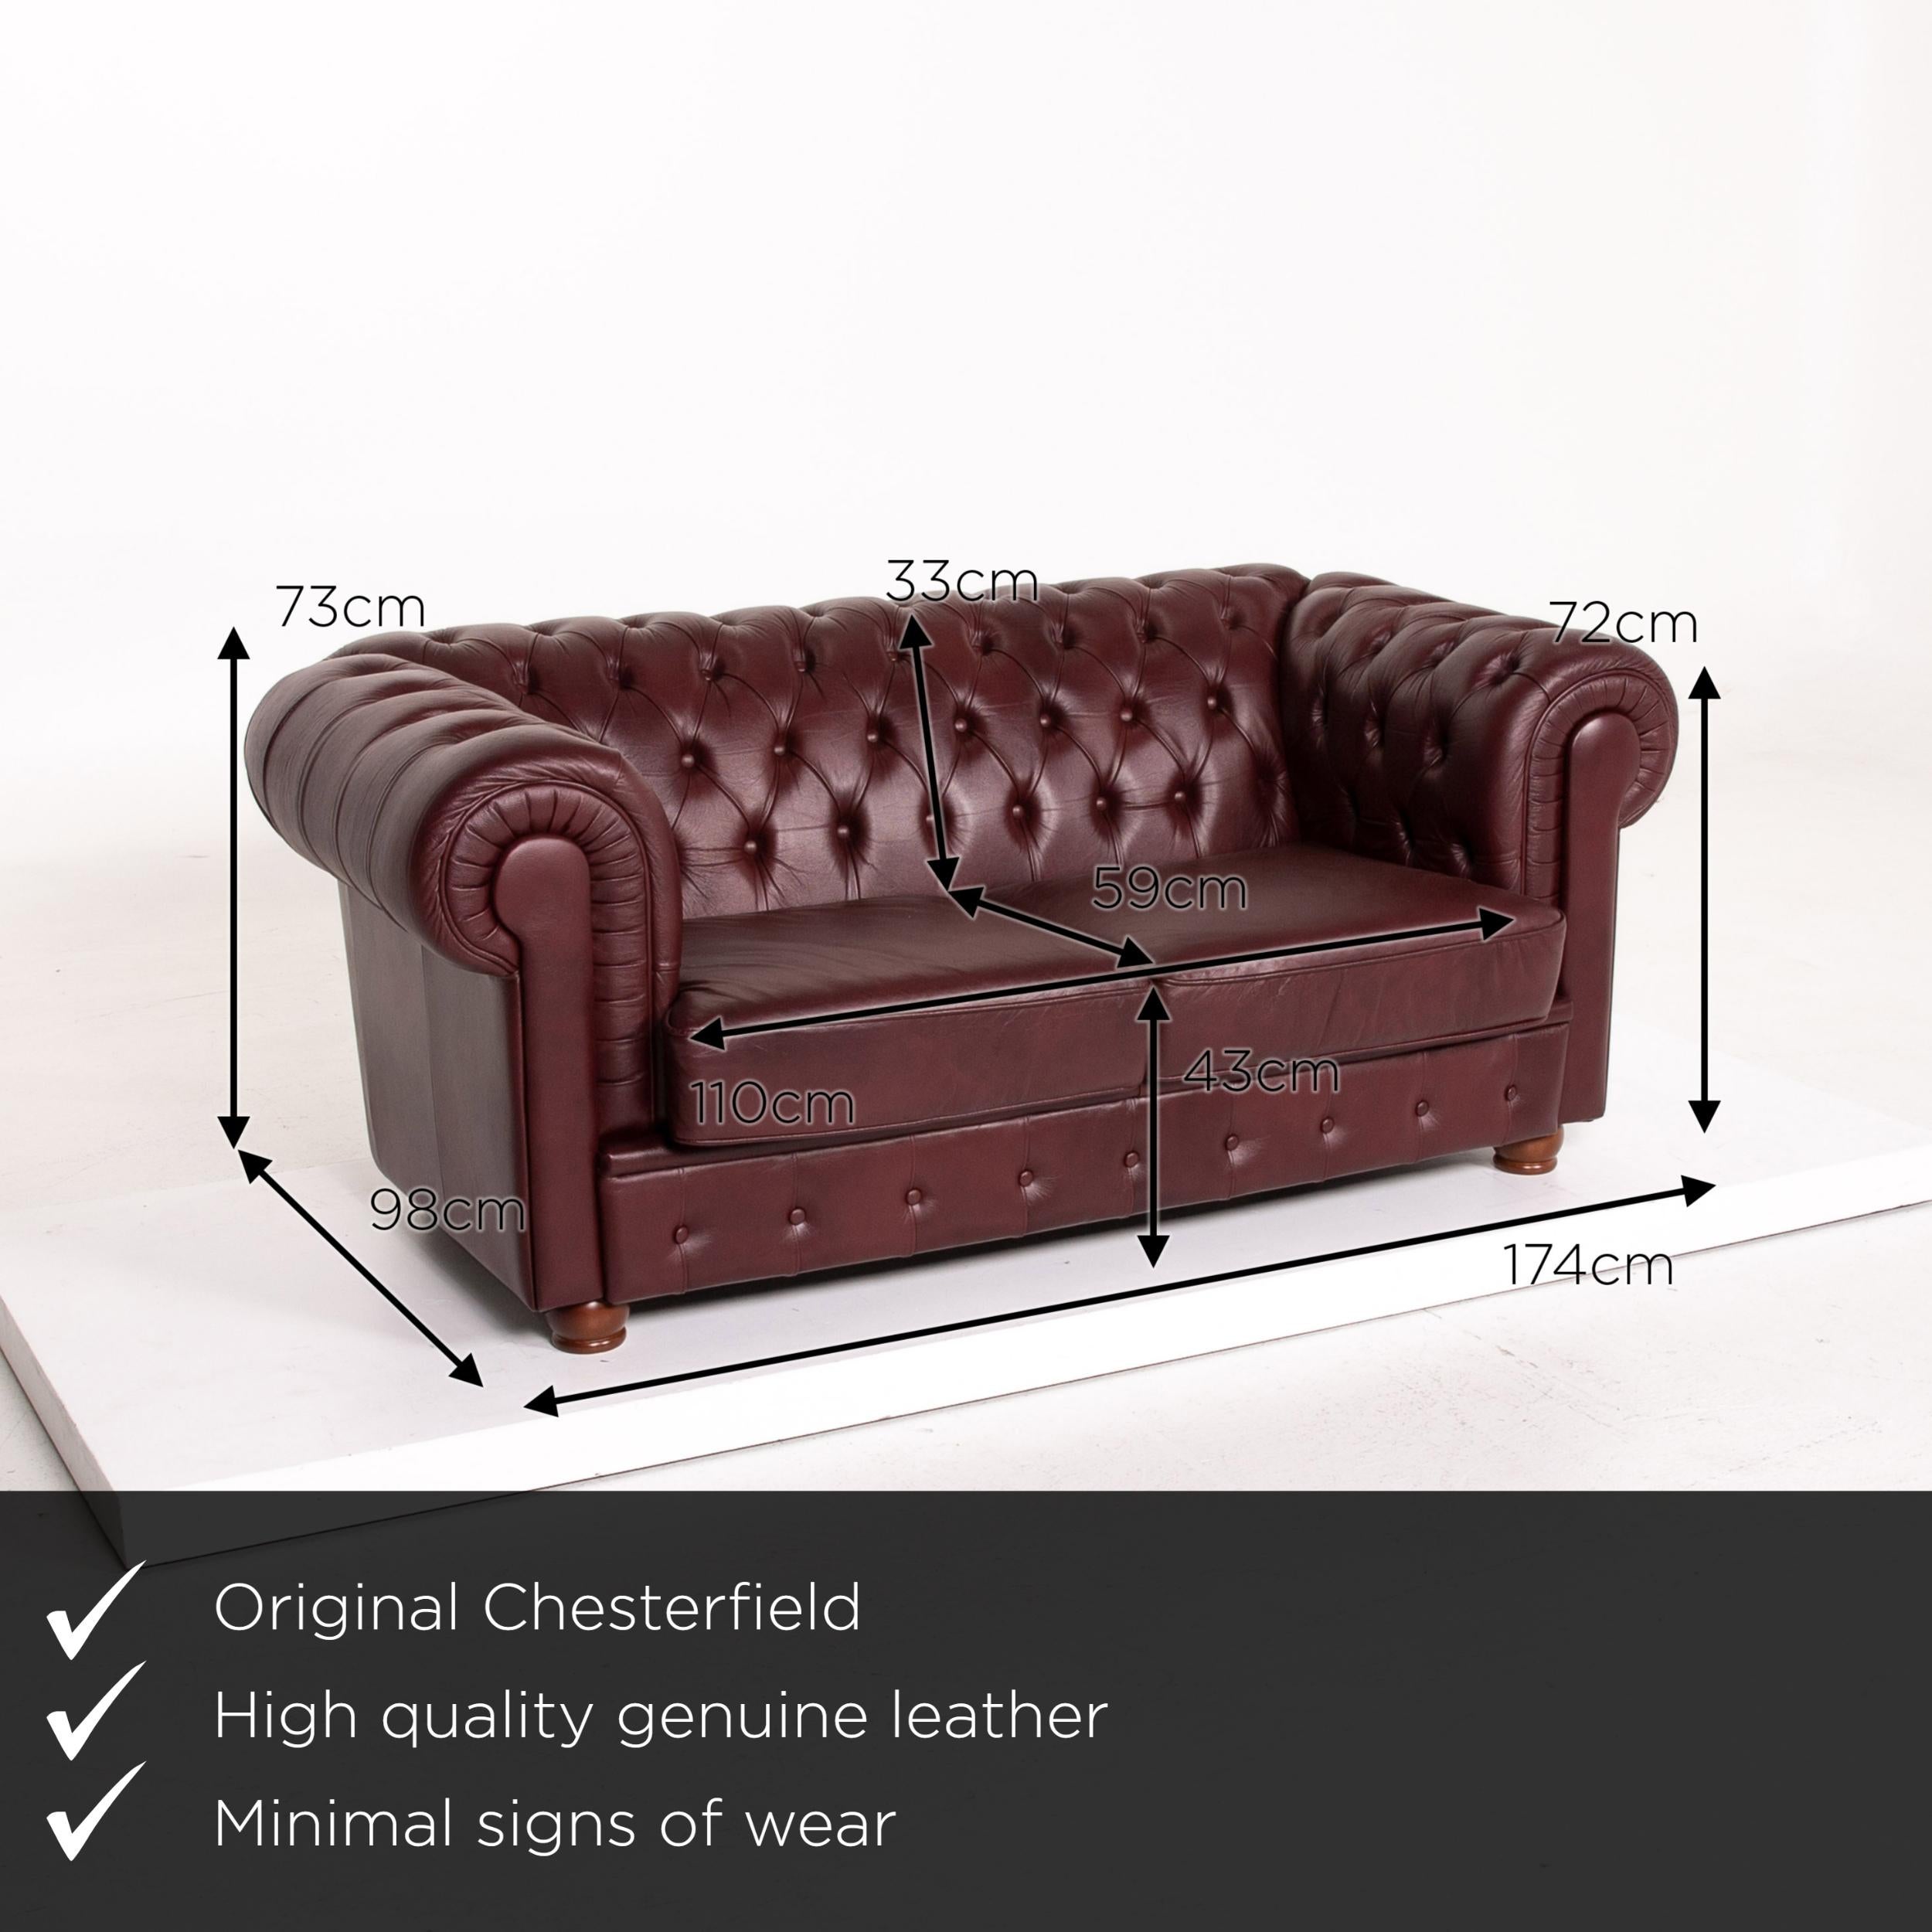 We present to you a Chesterfield leather sofa Bordeaux red two-seat vintage retro couch.

Product measurements in centimeters:

Depth 98
Width 174
Height 73
Seat height 43
Rest height 72
Seat depth 59
Seat width 110
Back height 33.